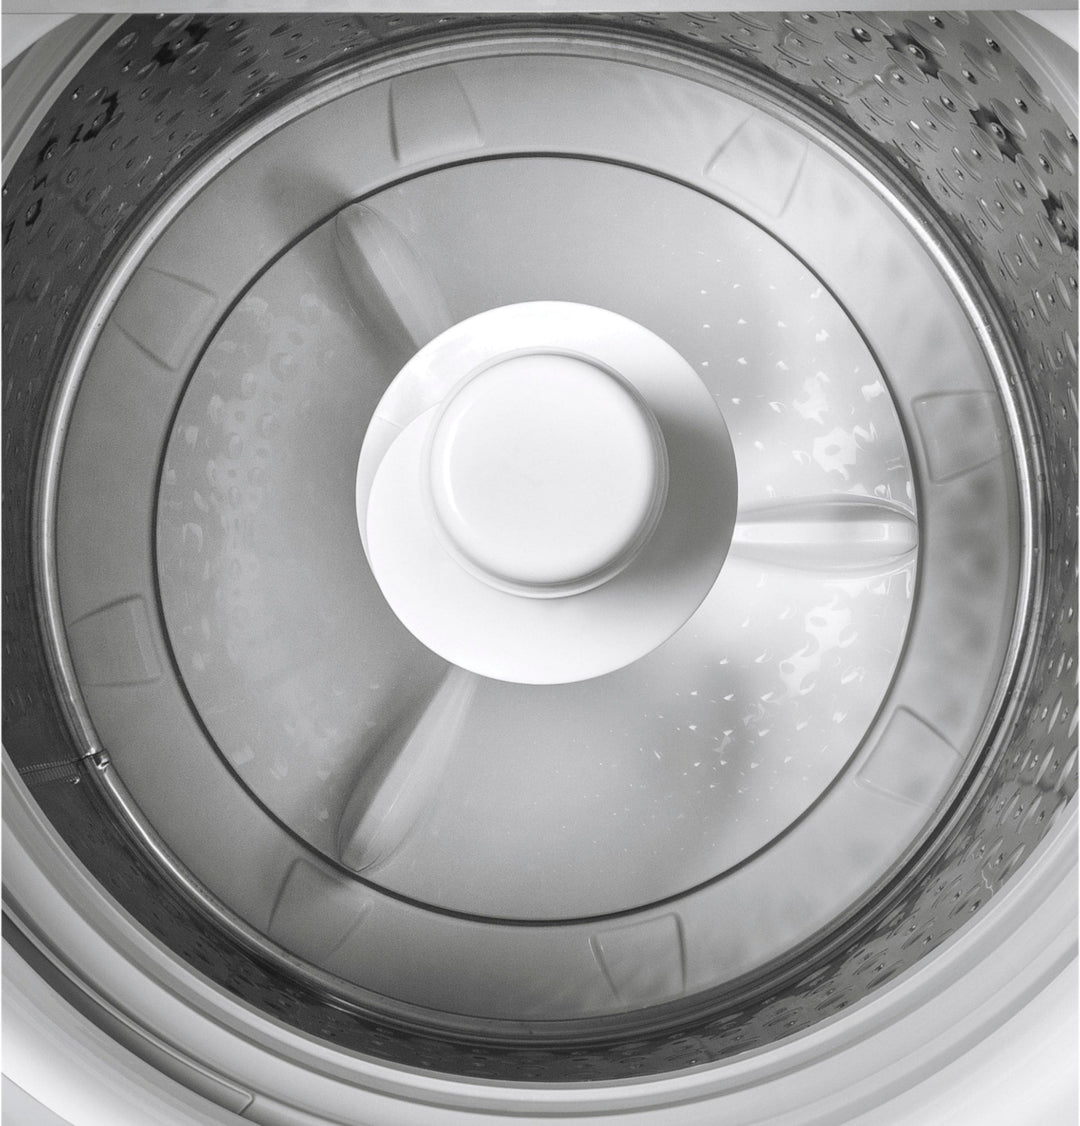 GE - 4.6 Cu. Ft. High-Efficiency Top Load Washer with FlexDispense - Diamond gray_8